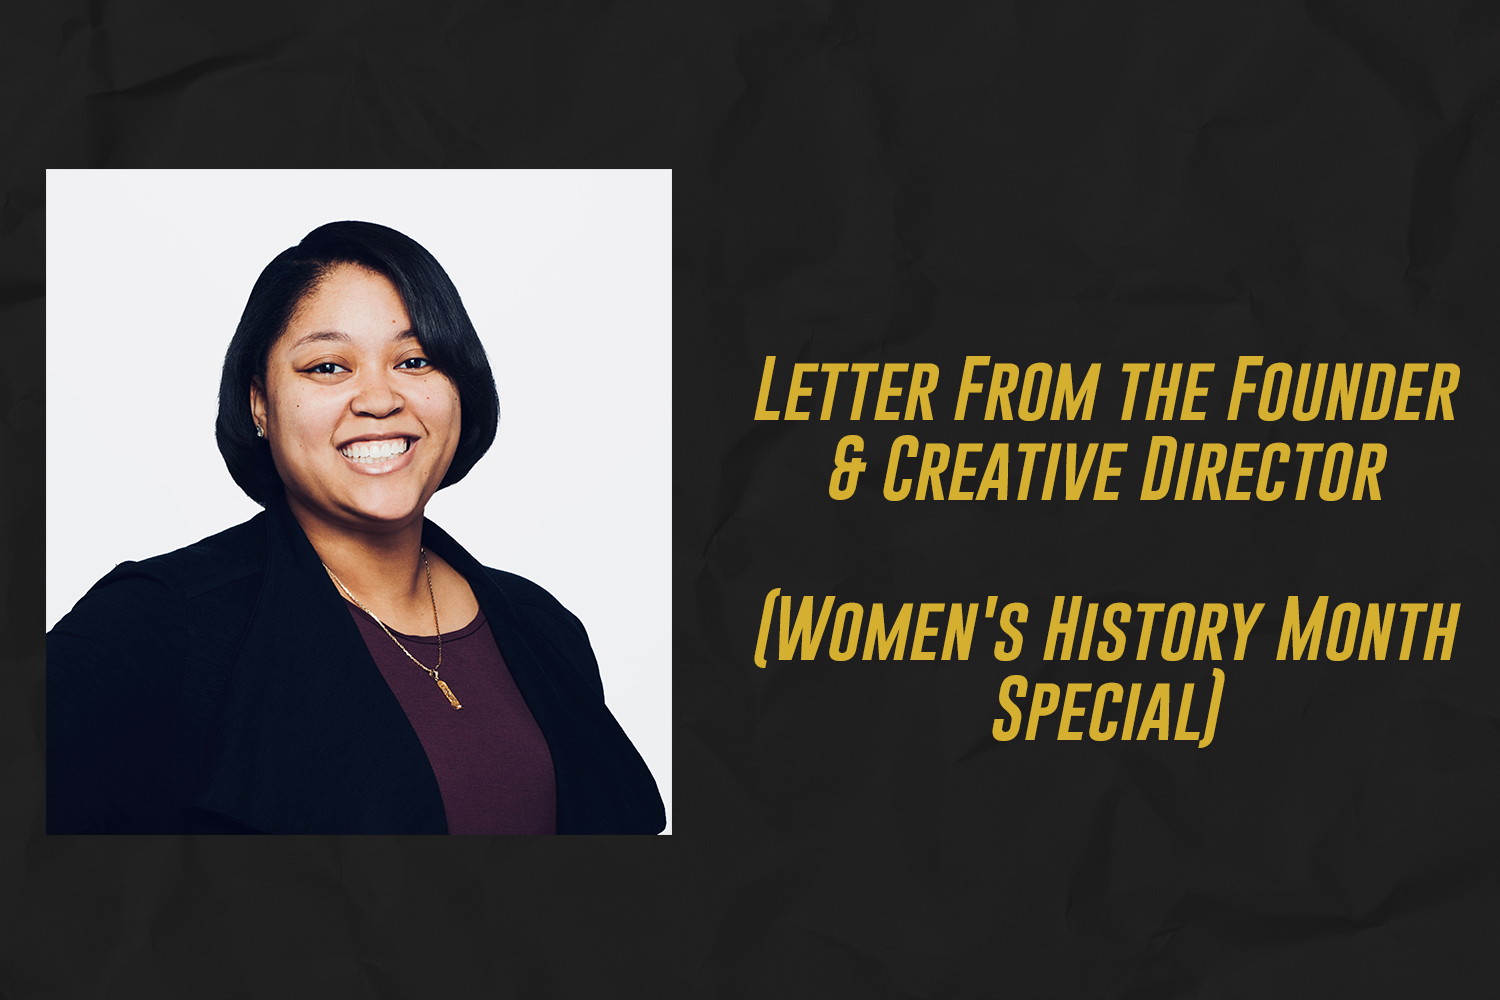 Letter From the Founder & Creative Director (Women's History Month Special)